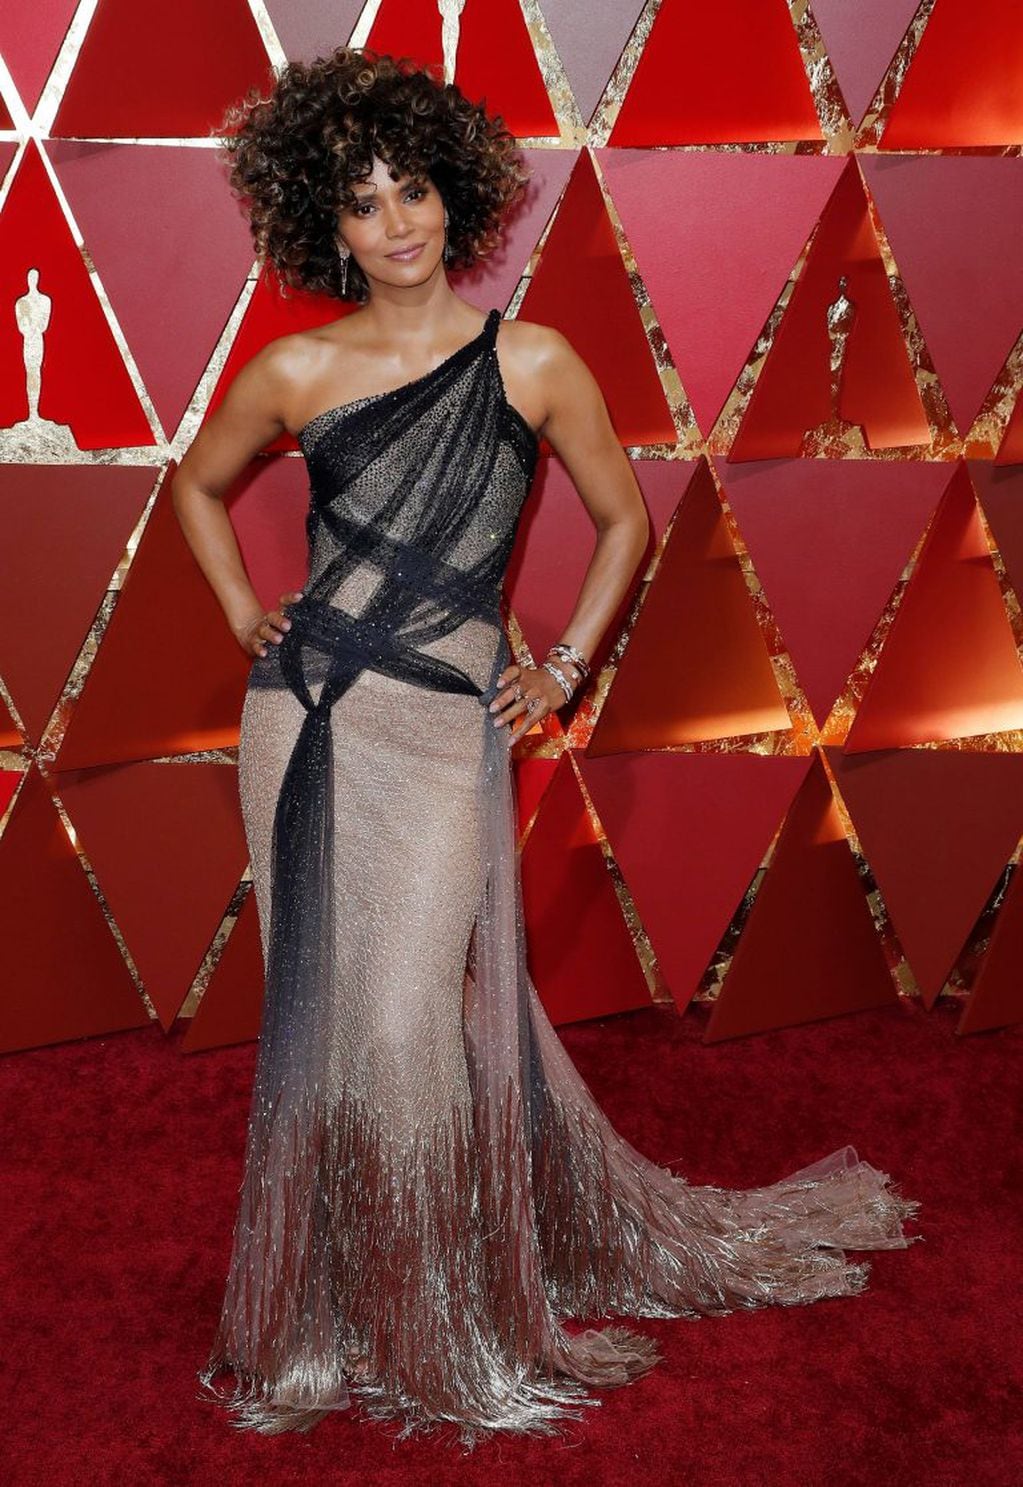 MCX210. Hollywood (United States), 26/02/2017.- Halle Berry arrives for the 89th annual Academy Awards ceremony at the Dolby Theatre in Hollywood, California, USA, 26 February 2017. The Oscars are presented for outstanding individual or collective efforts